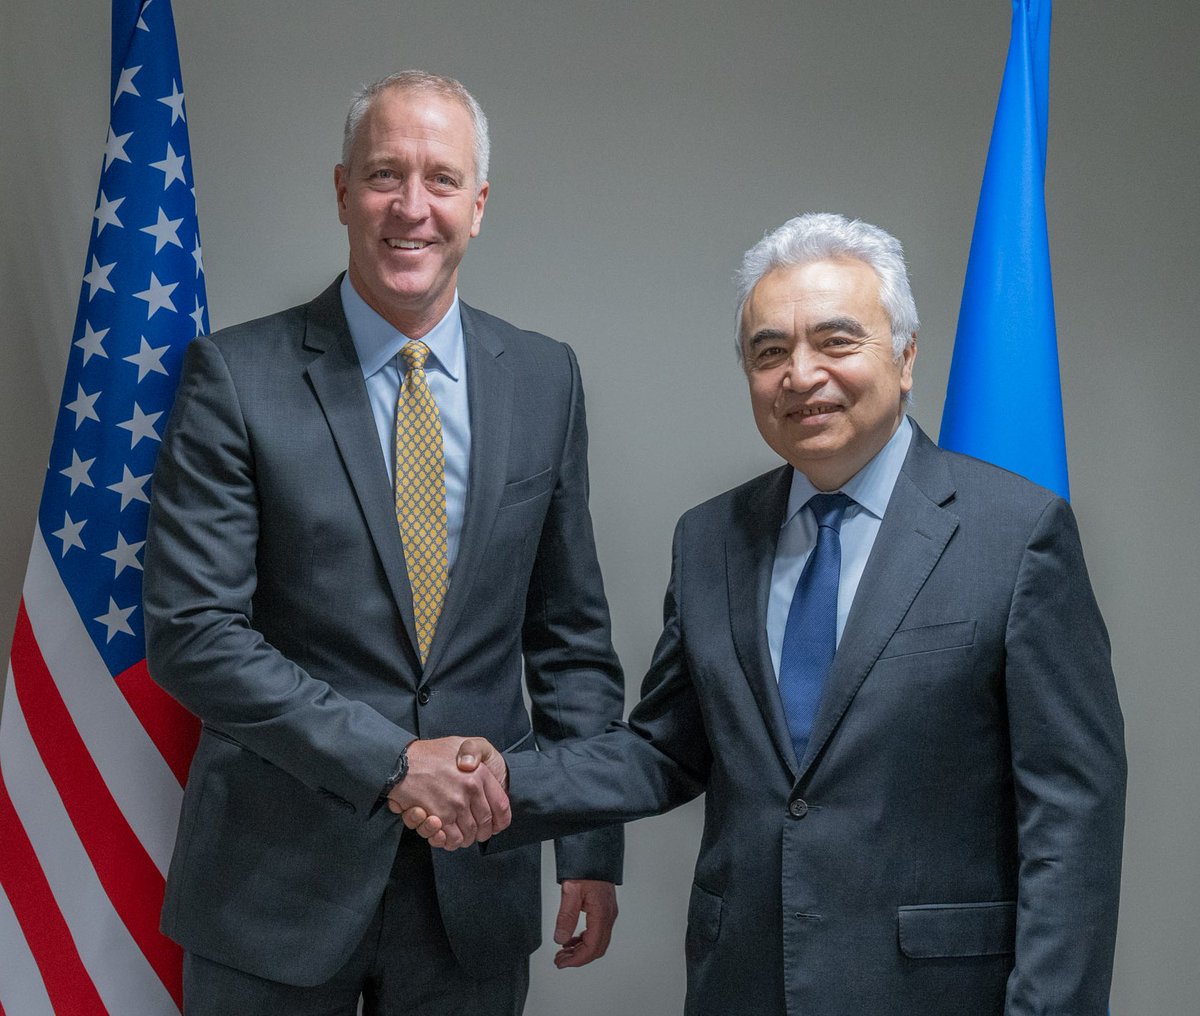 Delighted to welcome US Ambassador Sean Patrick Maloney to @IEA headquarters in Paris today. Look forward to working with the Ambassador on the 🇺🇸 government's strong engagement with IEA activities, notably on energy security & clean energy transitions.